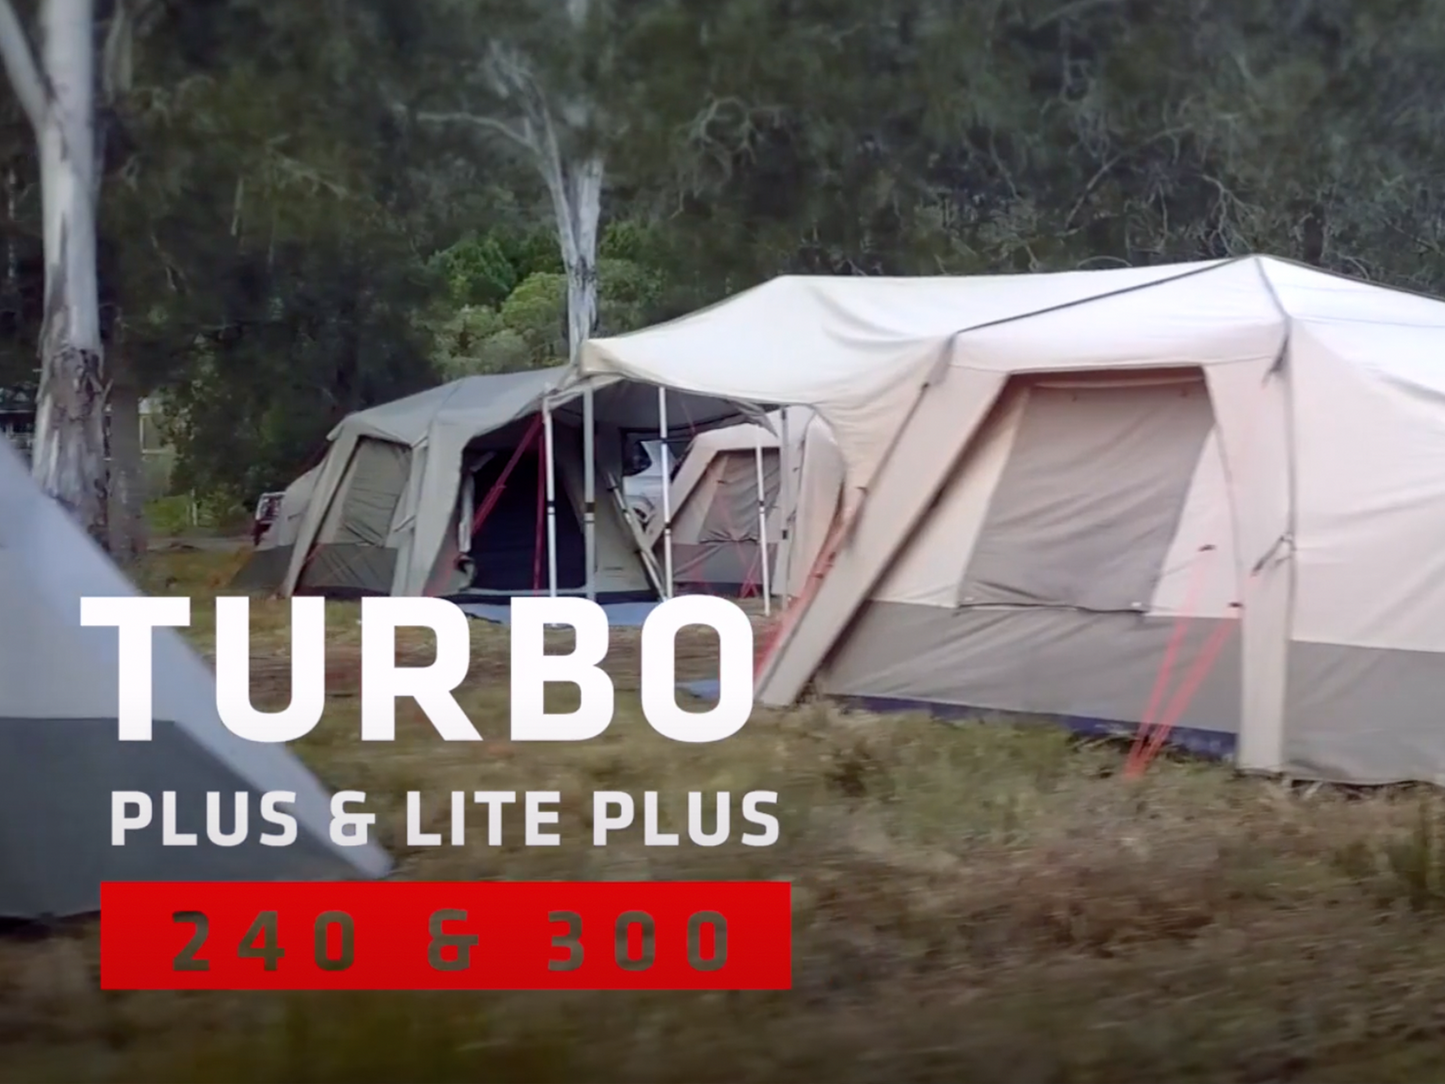 Turbo Plus Tent: Pitching and Pack-Down Instructions